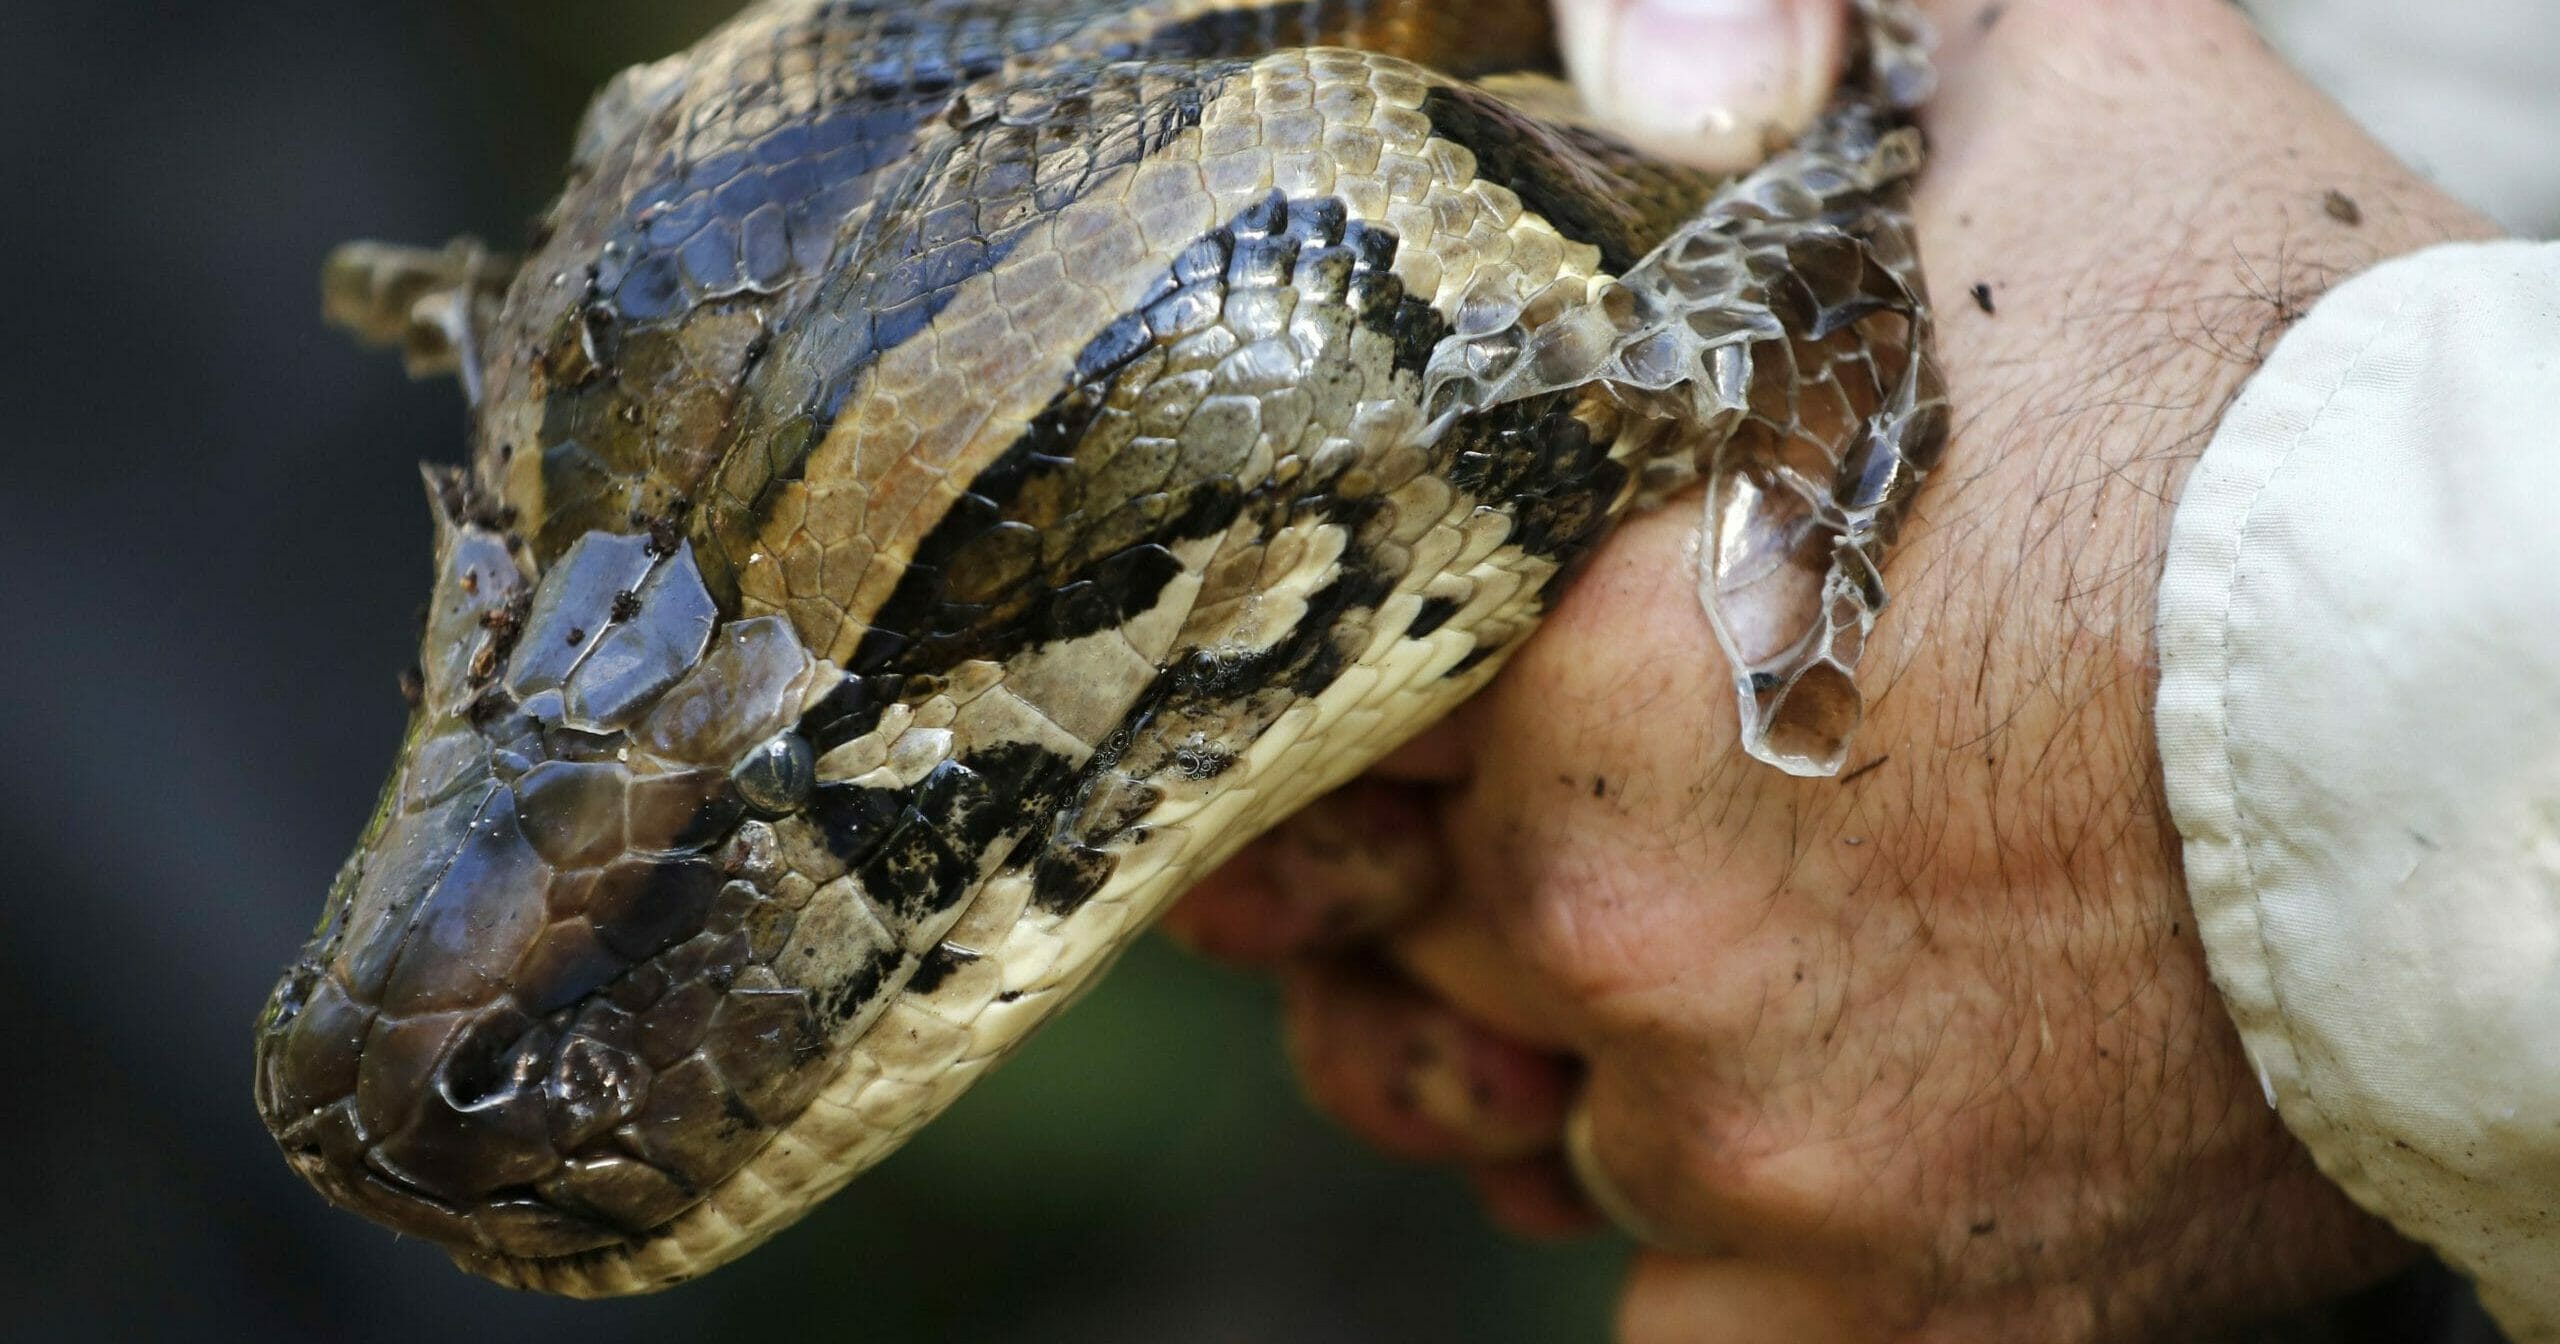 A 14-foot, 95-pound, female Burmese python is held tightly by wildlife biologist Ian Bartoszek after he captured it in Naples, Florida, on Oct. 23, 2019.